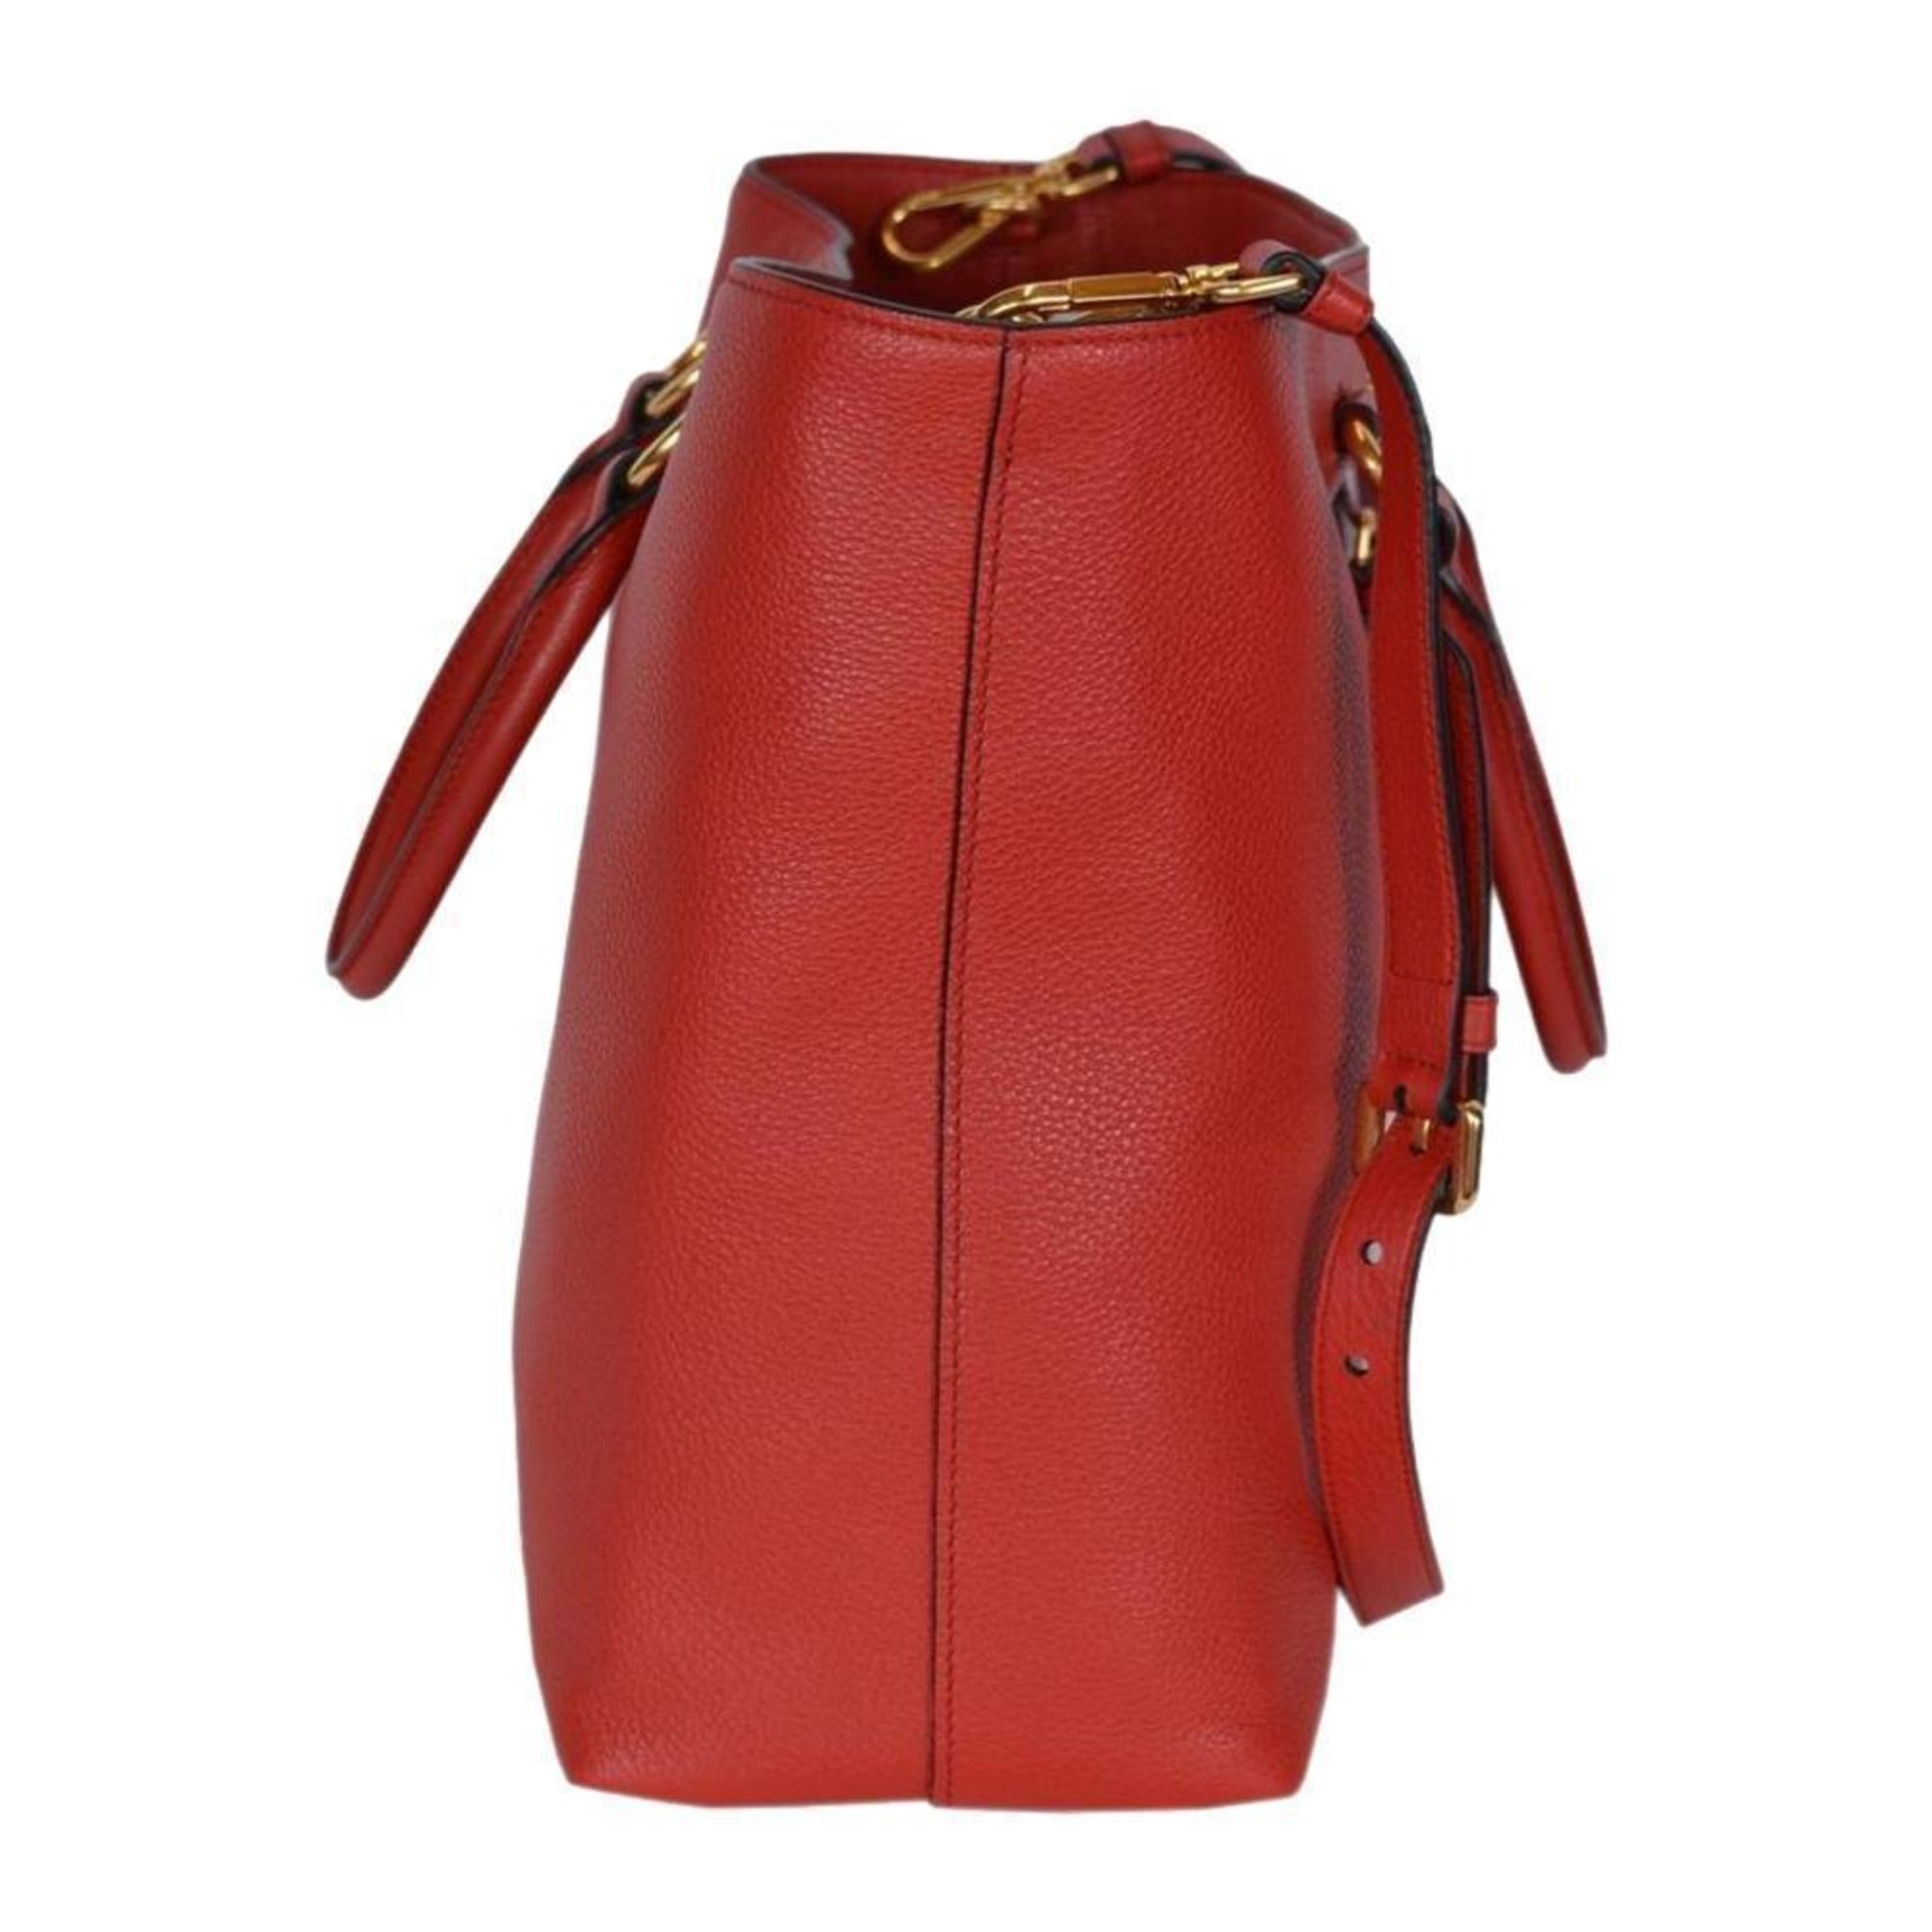 Prada Vitello Phenix Red Leather Shopping Tote 1BG865 at_Queen_Bee_of_Beverly_Hills